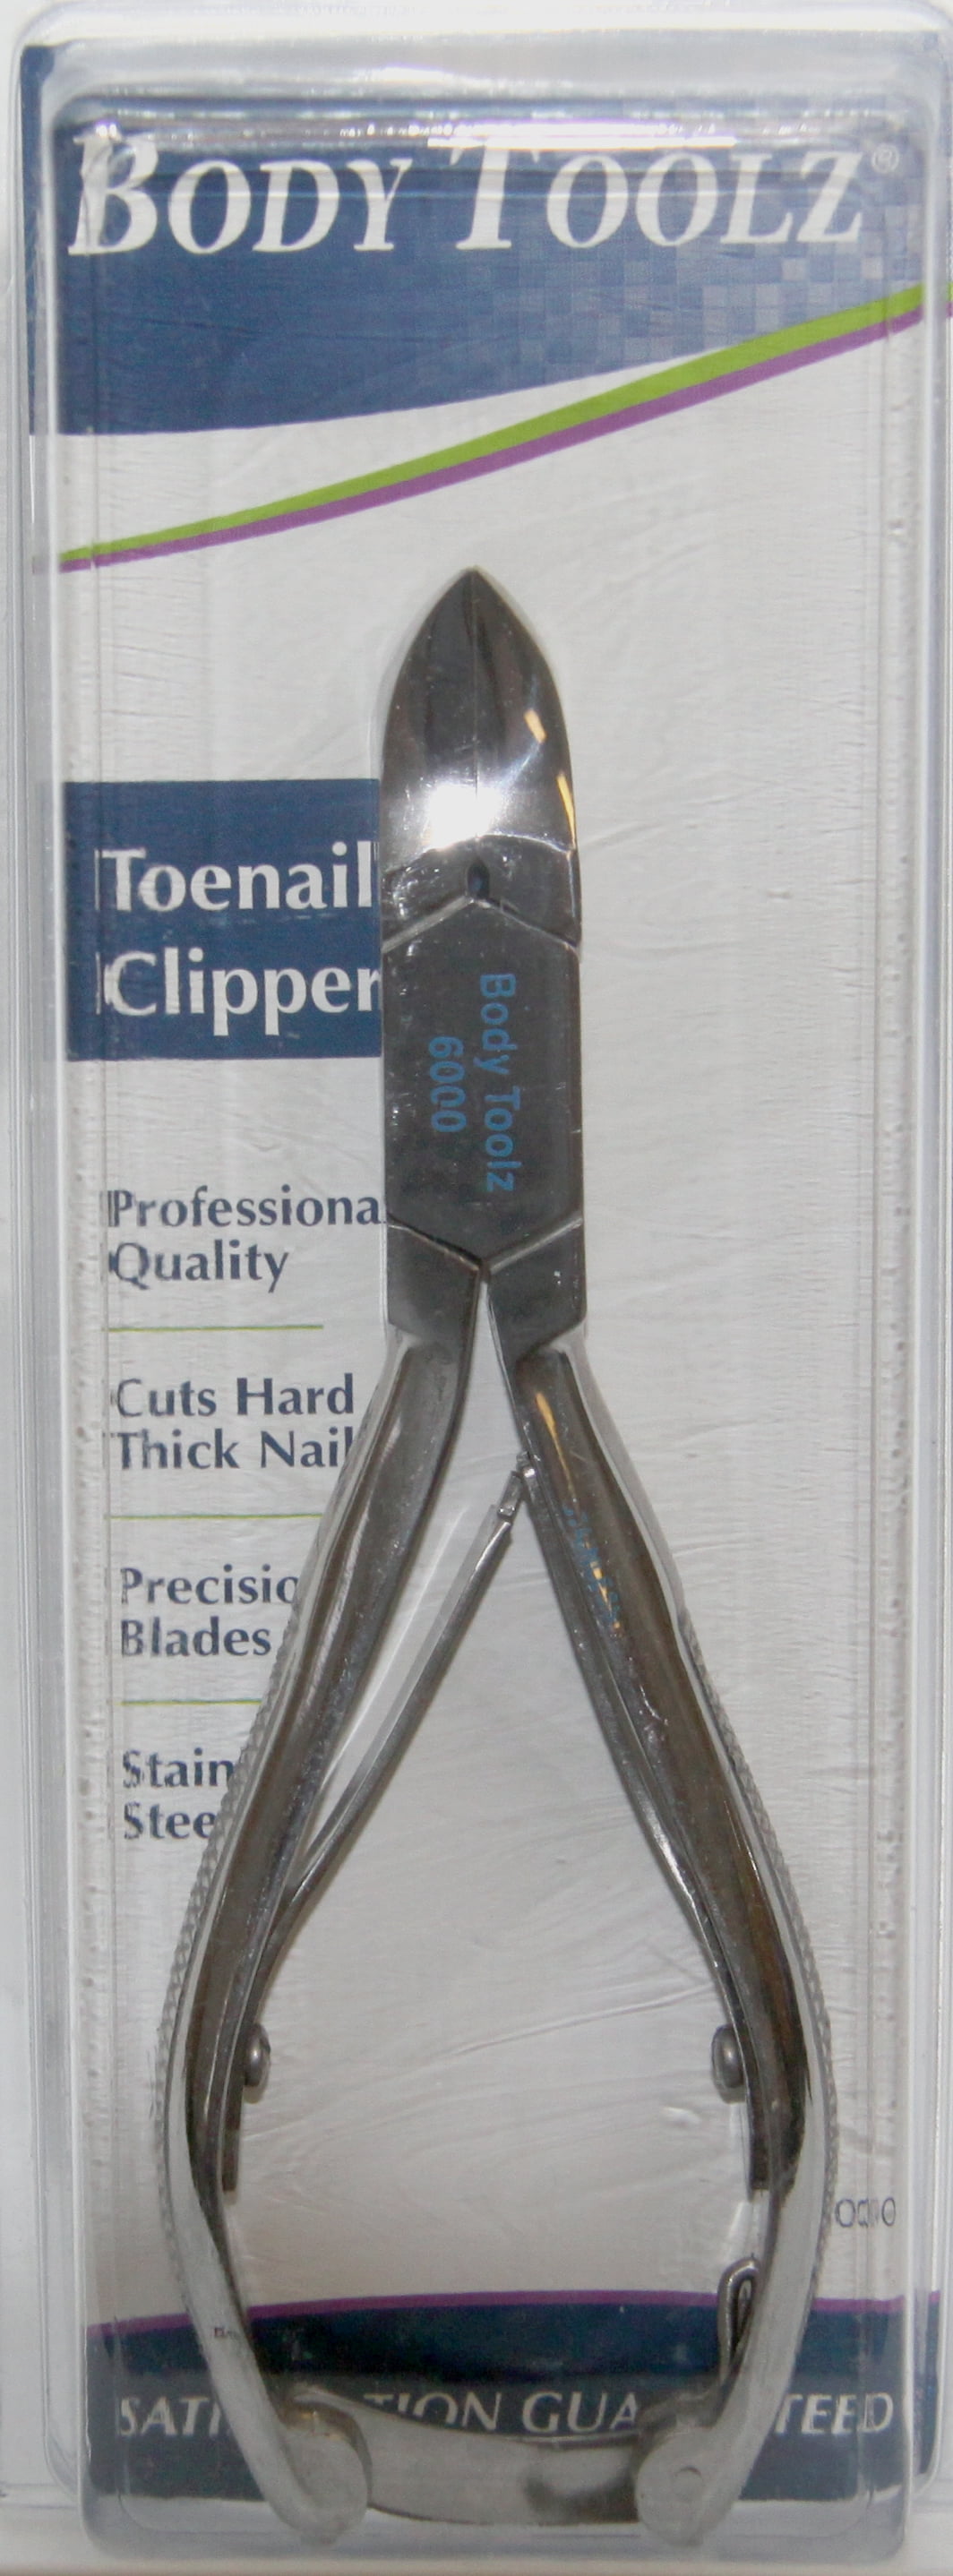 Body Toolz 5 1/2 Professional Toenail Clippers BT6000